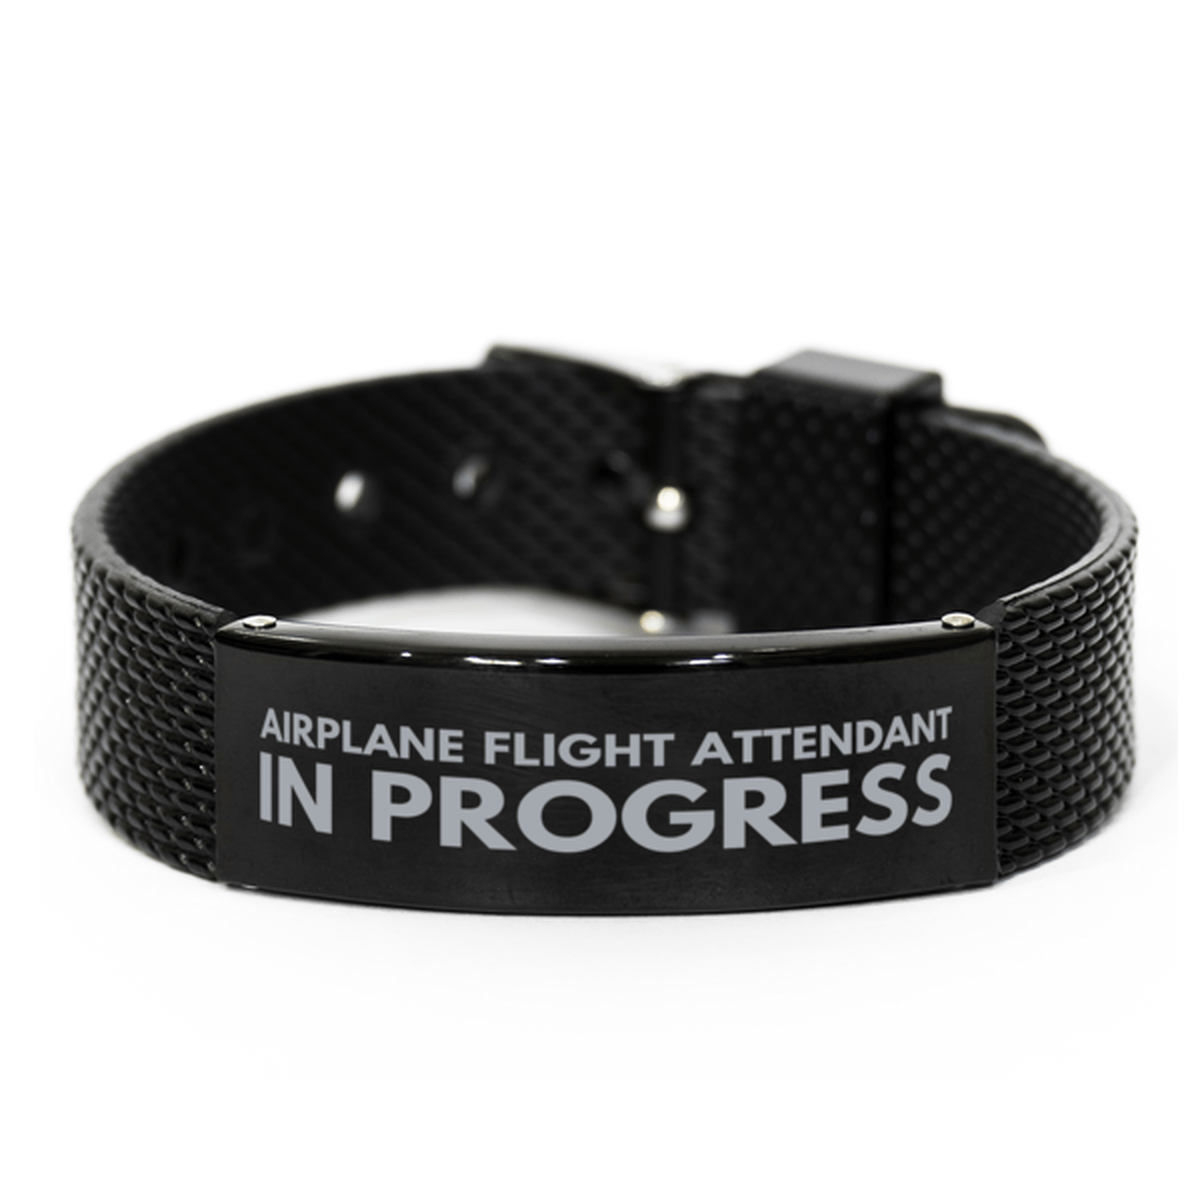 Inspirational Airplane Flight Attendant Black Shark Mesh Bracelet, Airplane Flight Attendant In Progress, Best Graduation Gifts for Students